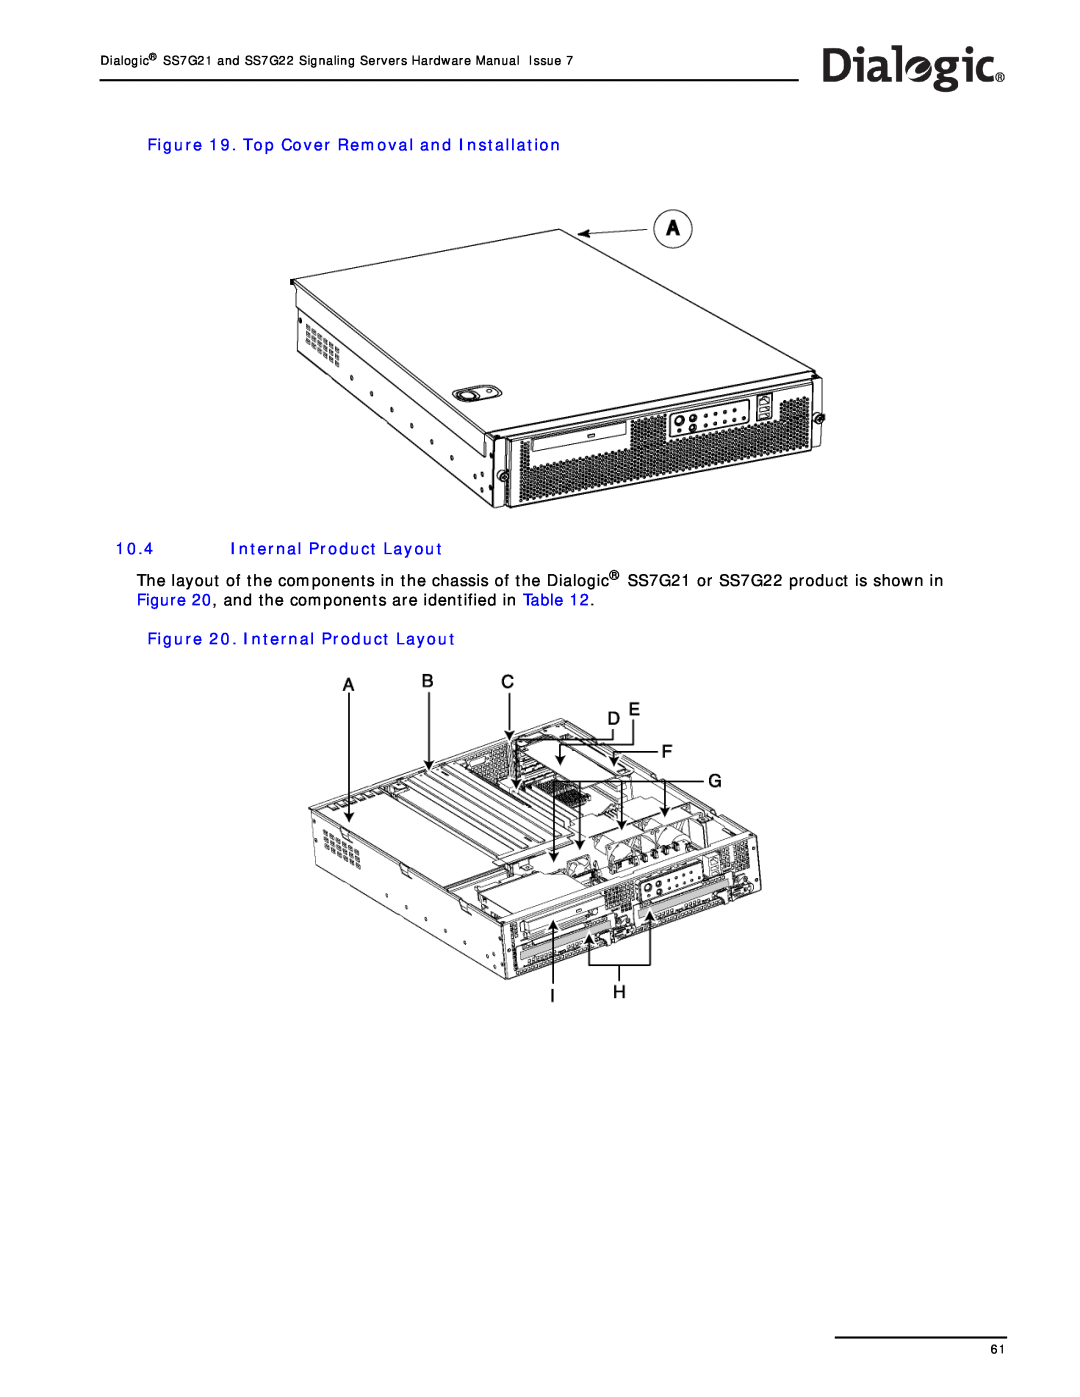 Dialogic SS7G22, SS7G21 manual Top Cover Removal and Installation, Internal Product Layout 